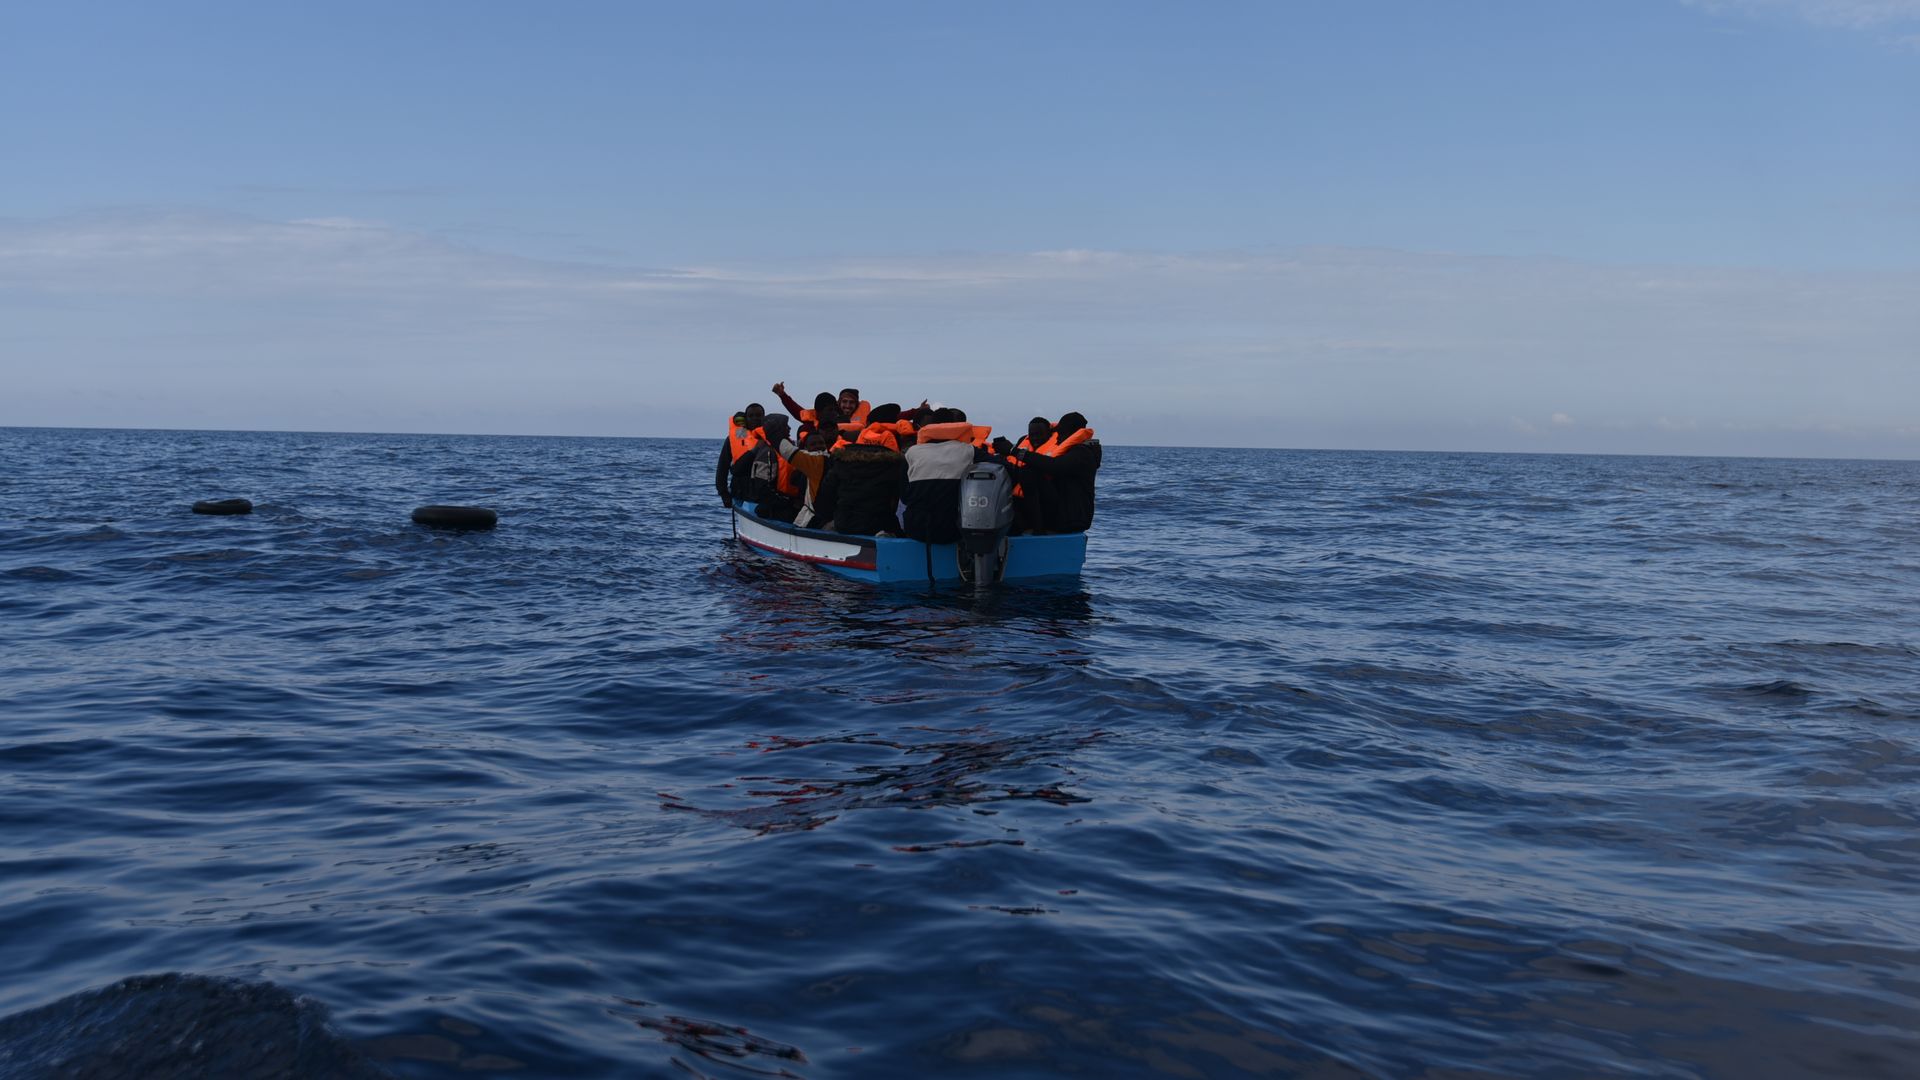 Migrants in a wooden boat, which left the coast of Libya, are waiting to be rescued by members of the NGO Open Arms, March 5, 2022, off the coast of Libya, in the Mediterranean Sea.